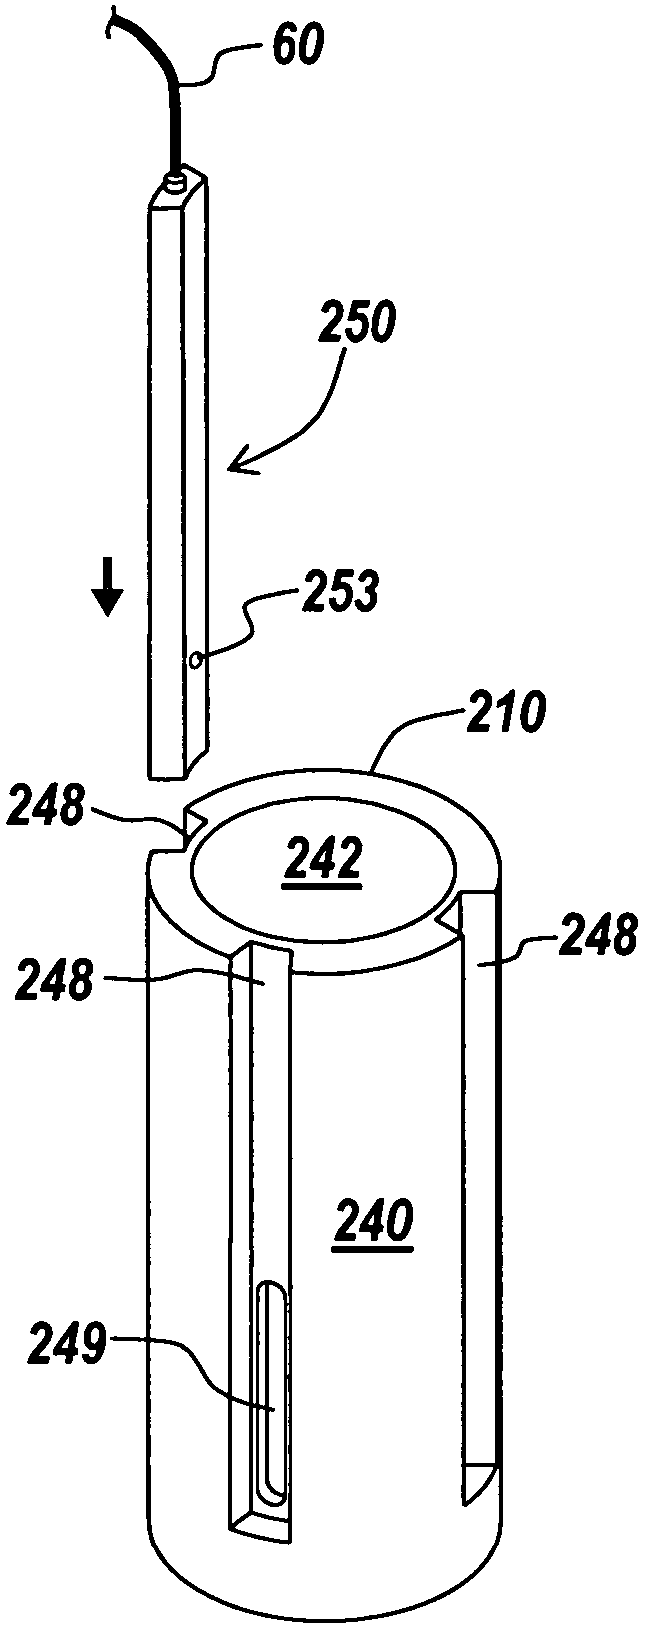 Illuminated surgical access system including a surgical access device and coupled light emitter